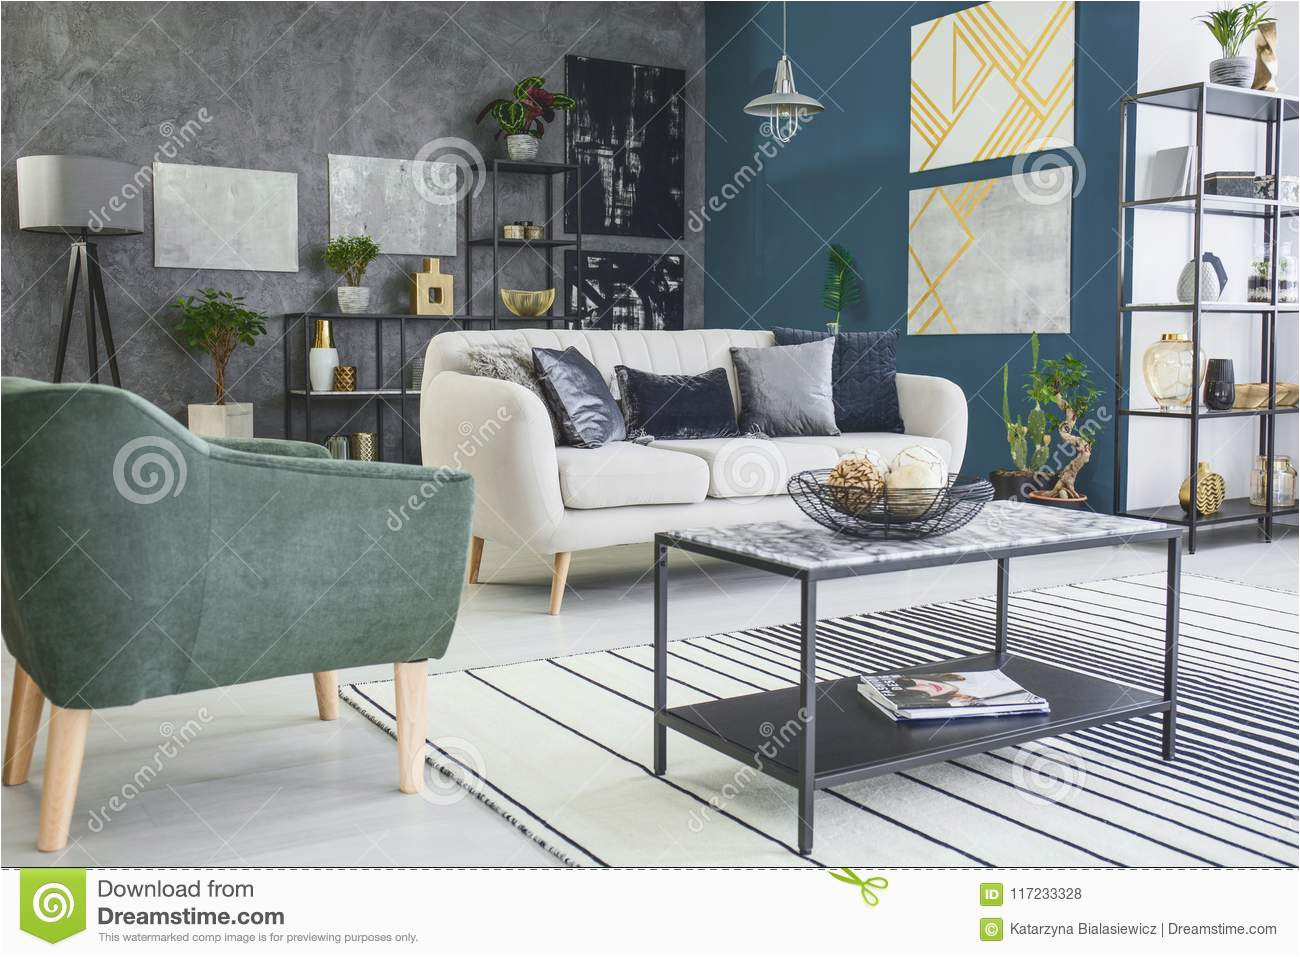 living room interior paintings low angle table striped rug next to green armchair sofa living room interior